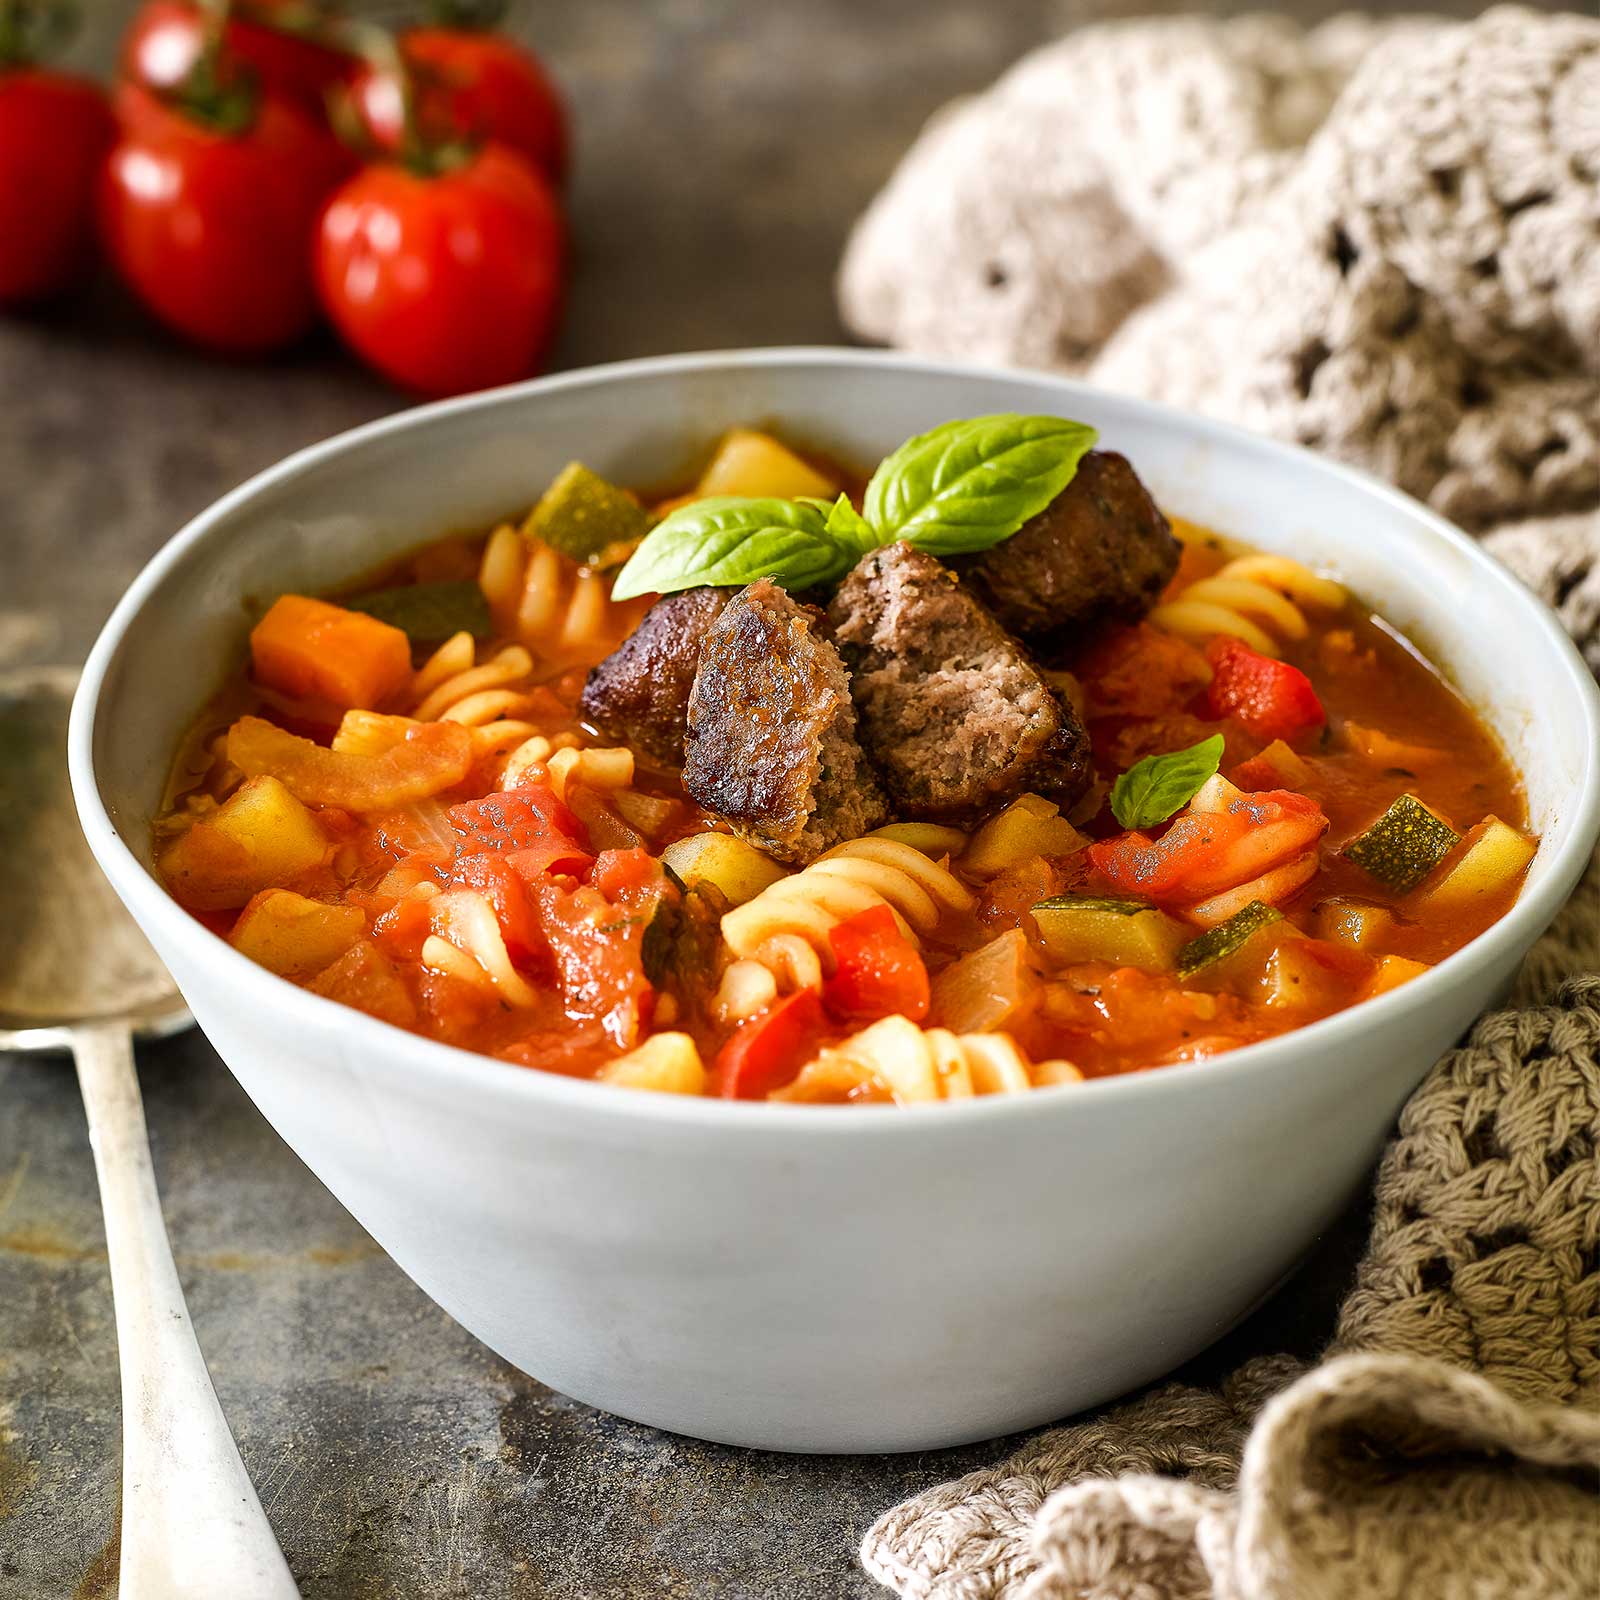 A light blue ceramic bowl is filled with gluten-free minestrone and topped with chopped meatballs and fresh basil leaves. Truss tomatoes sit behind the bowl.